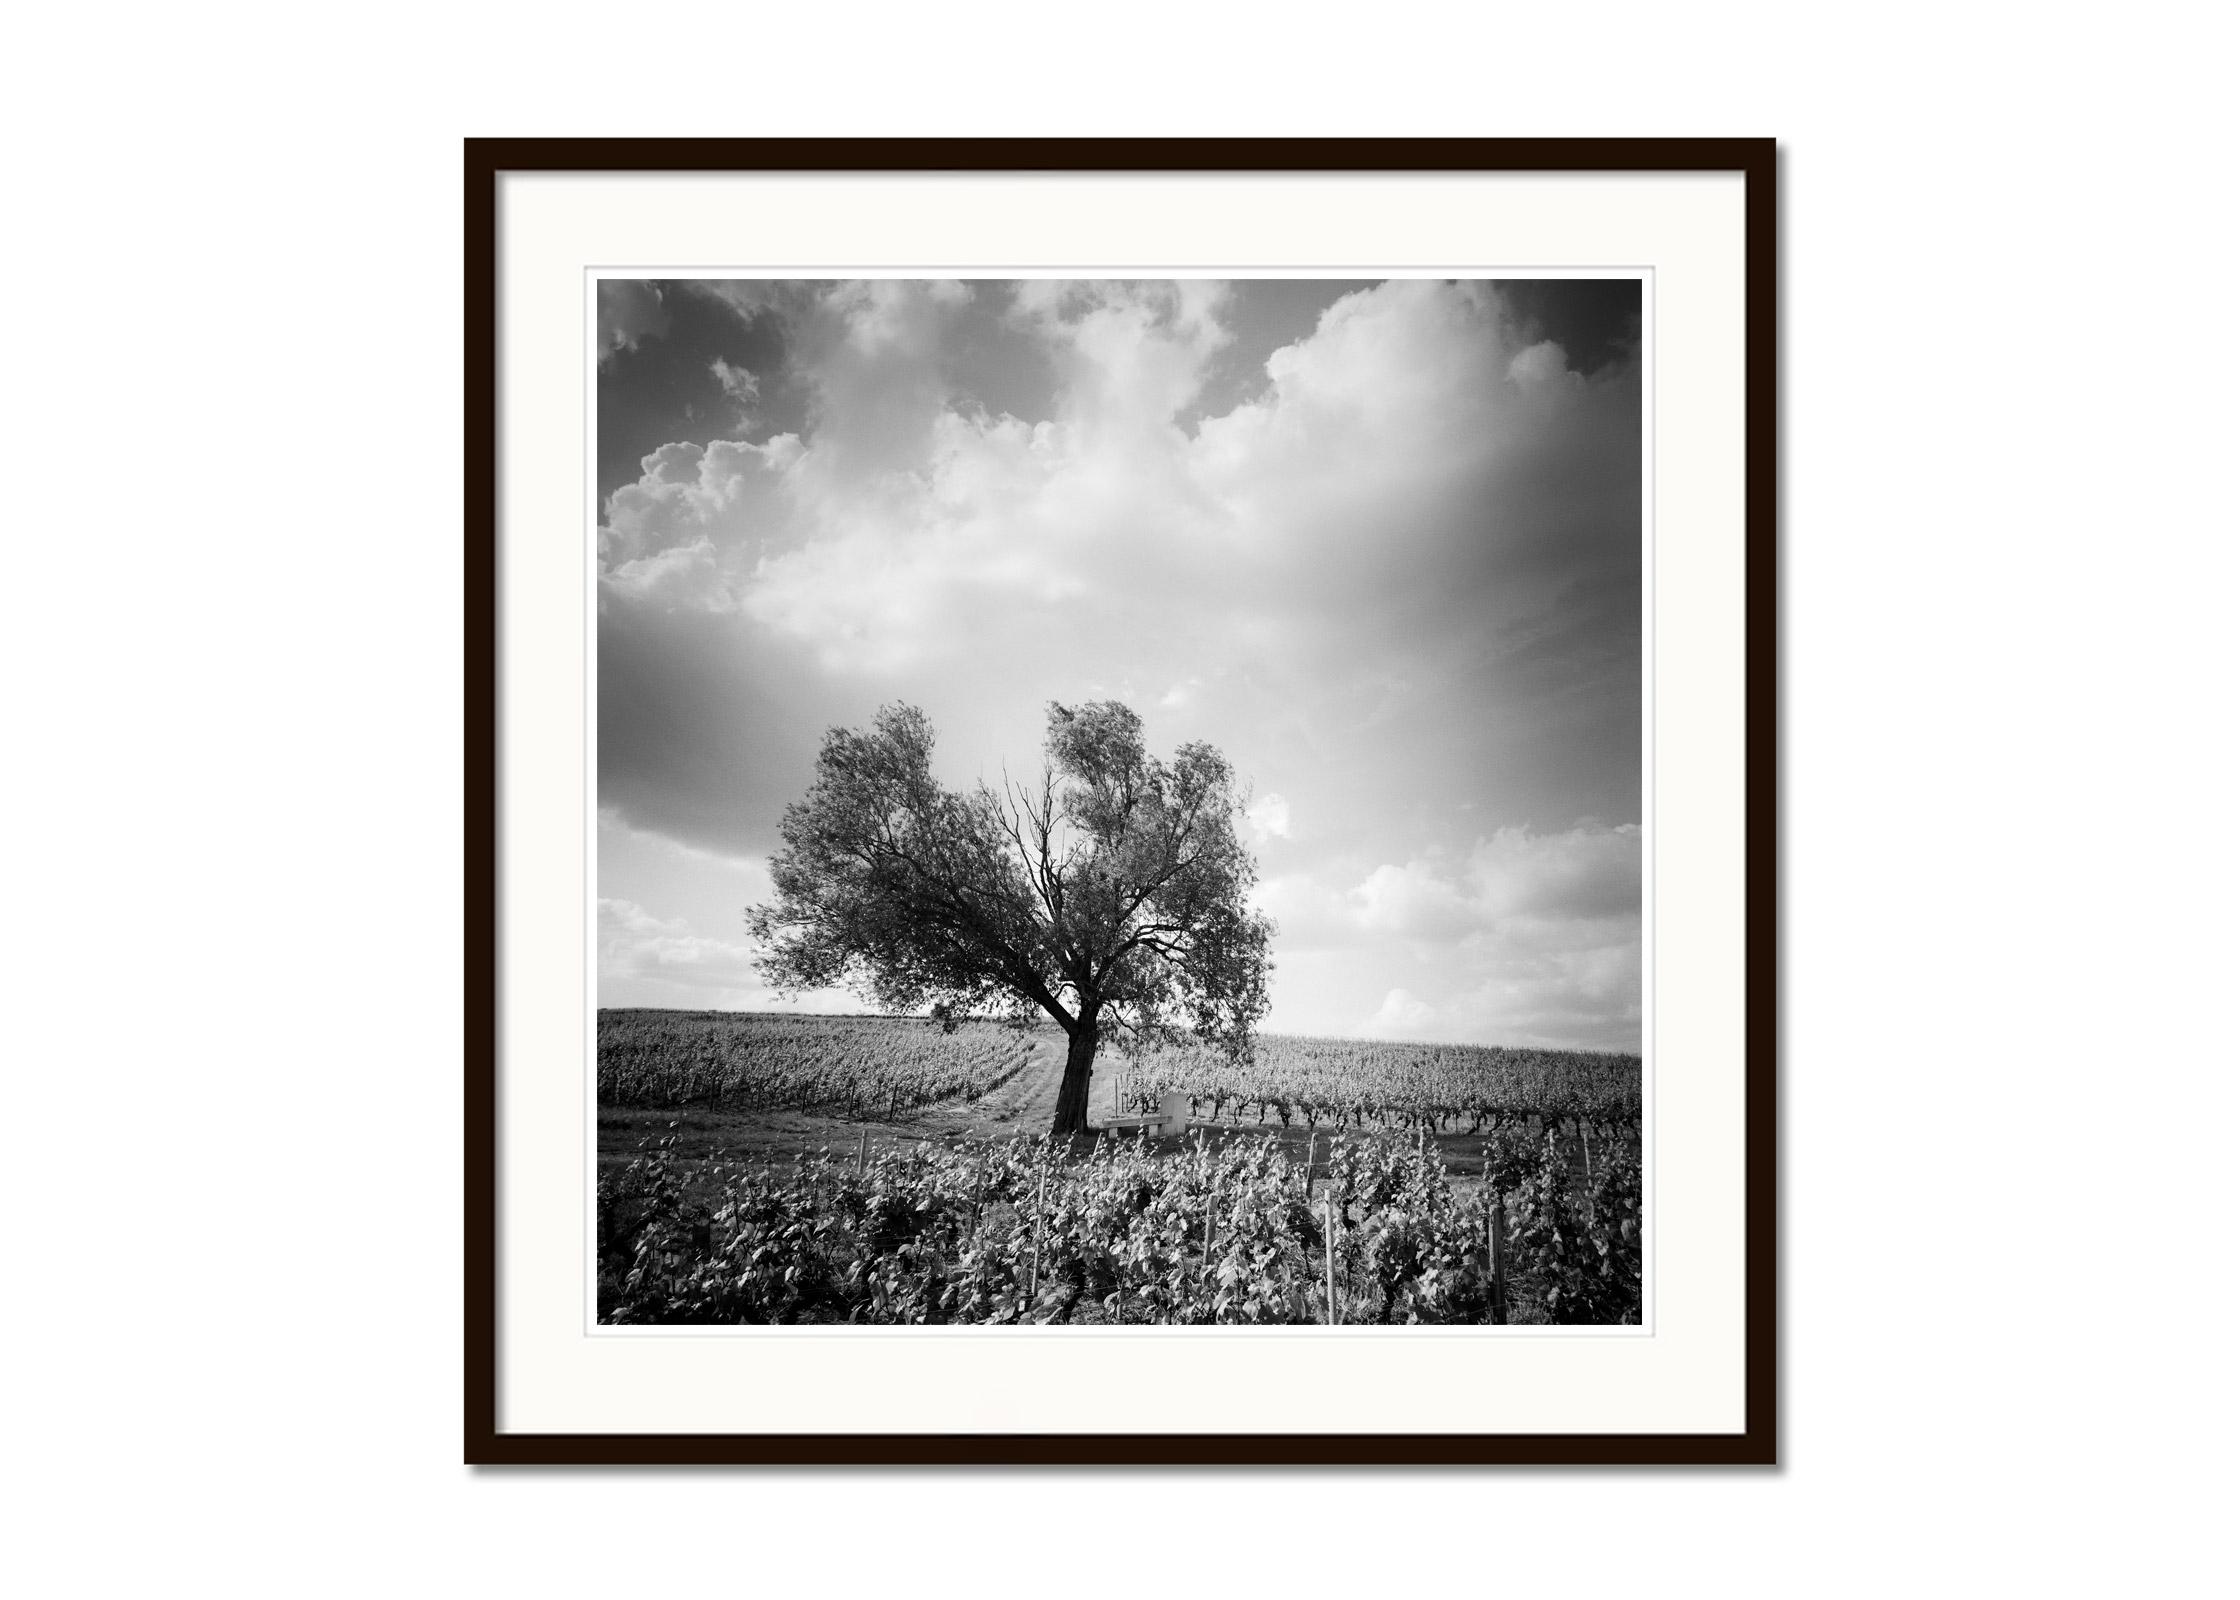 Old Tree at Vineyard, Bordeaux, France, black and white landscape photography - Gray Landscape Photograph by Gerald Berghammer